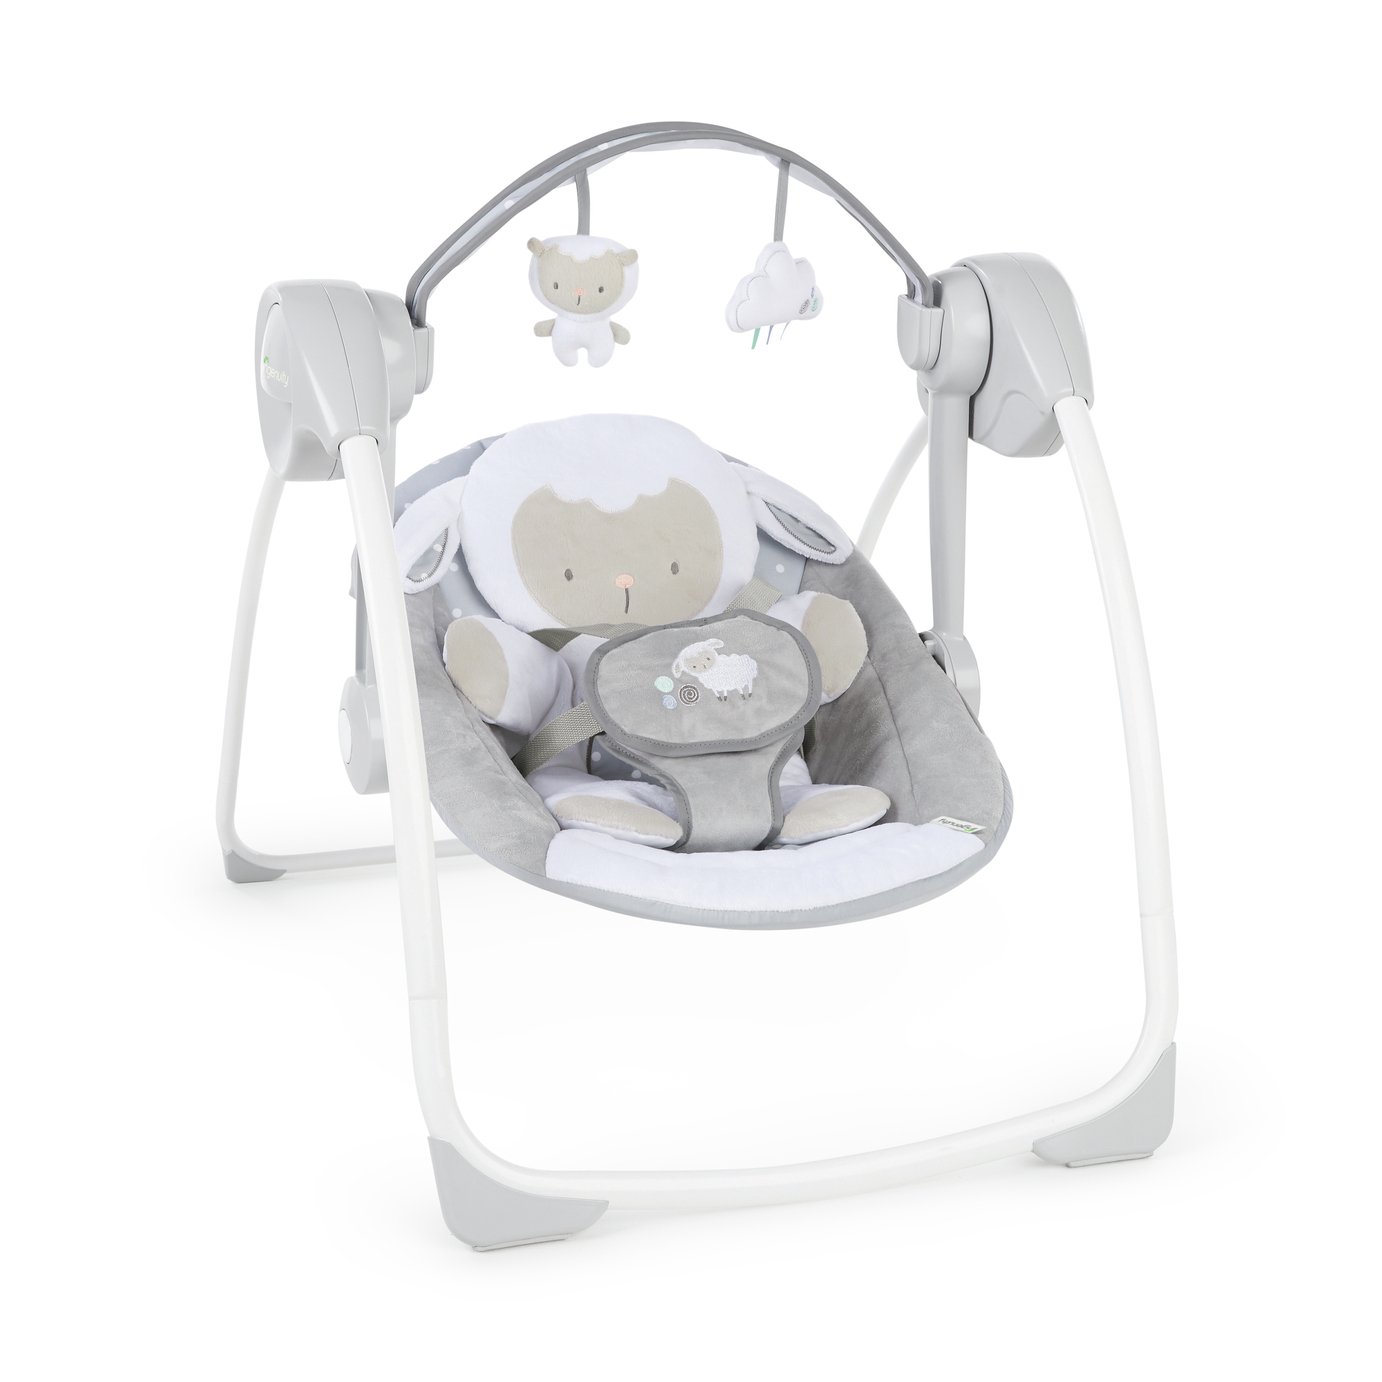 Ingenuity Comfort 2 Go Portable Swing Review